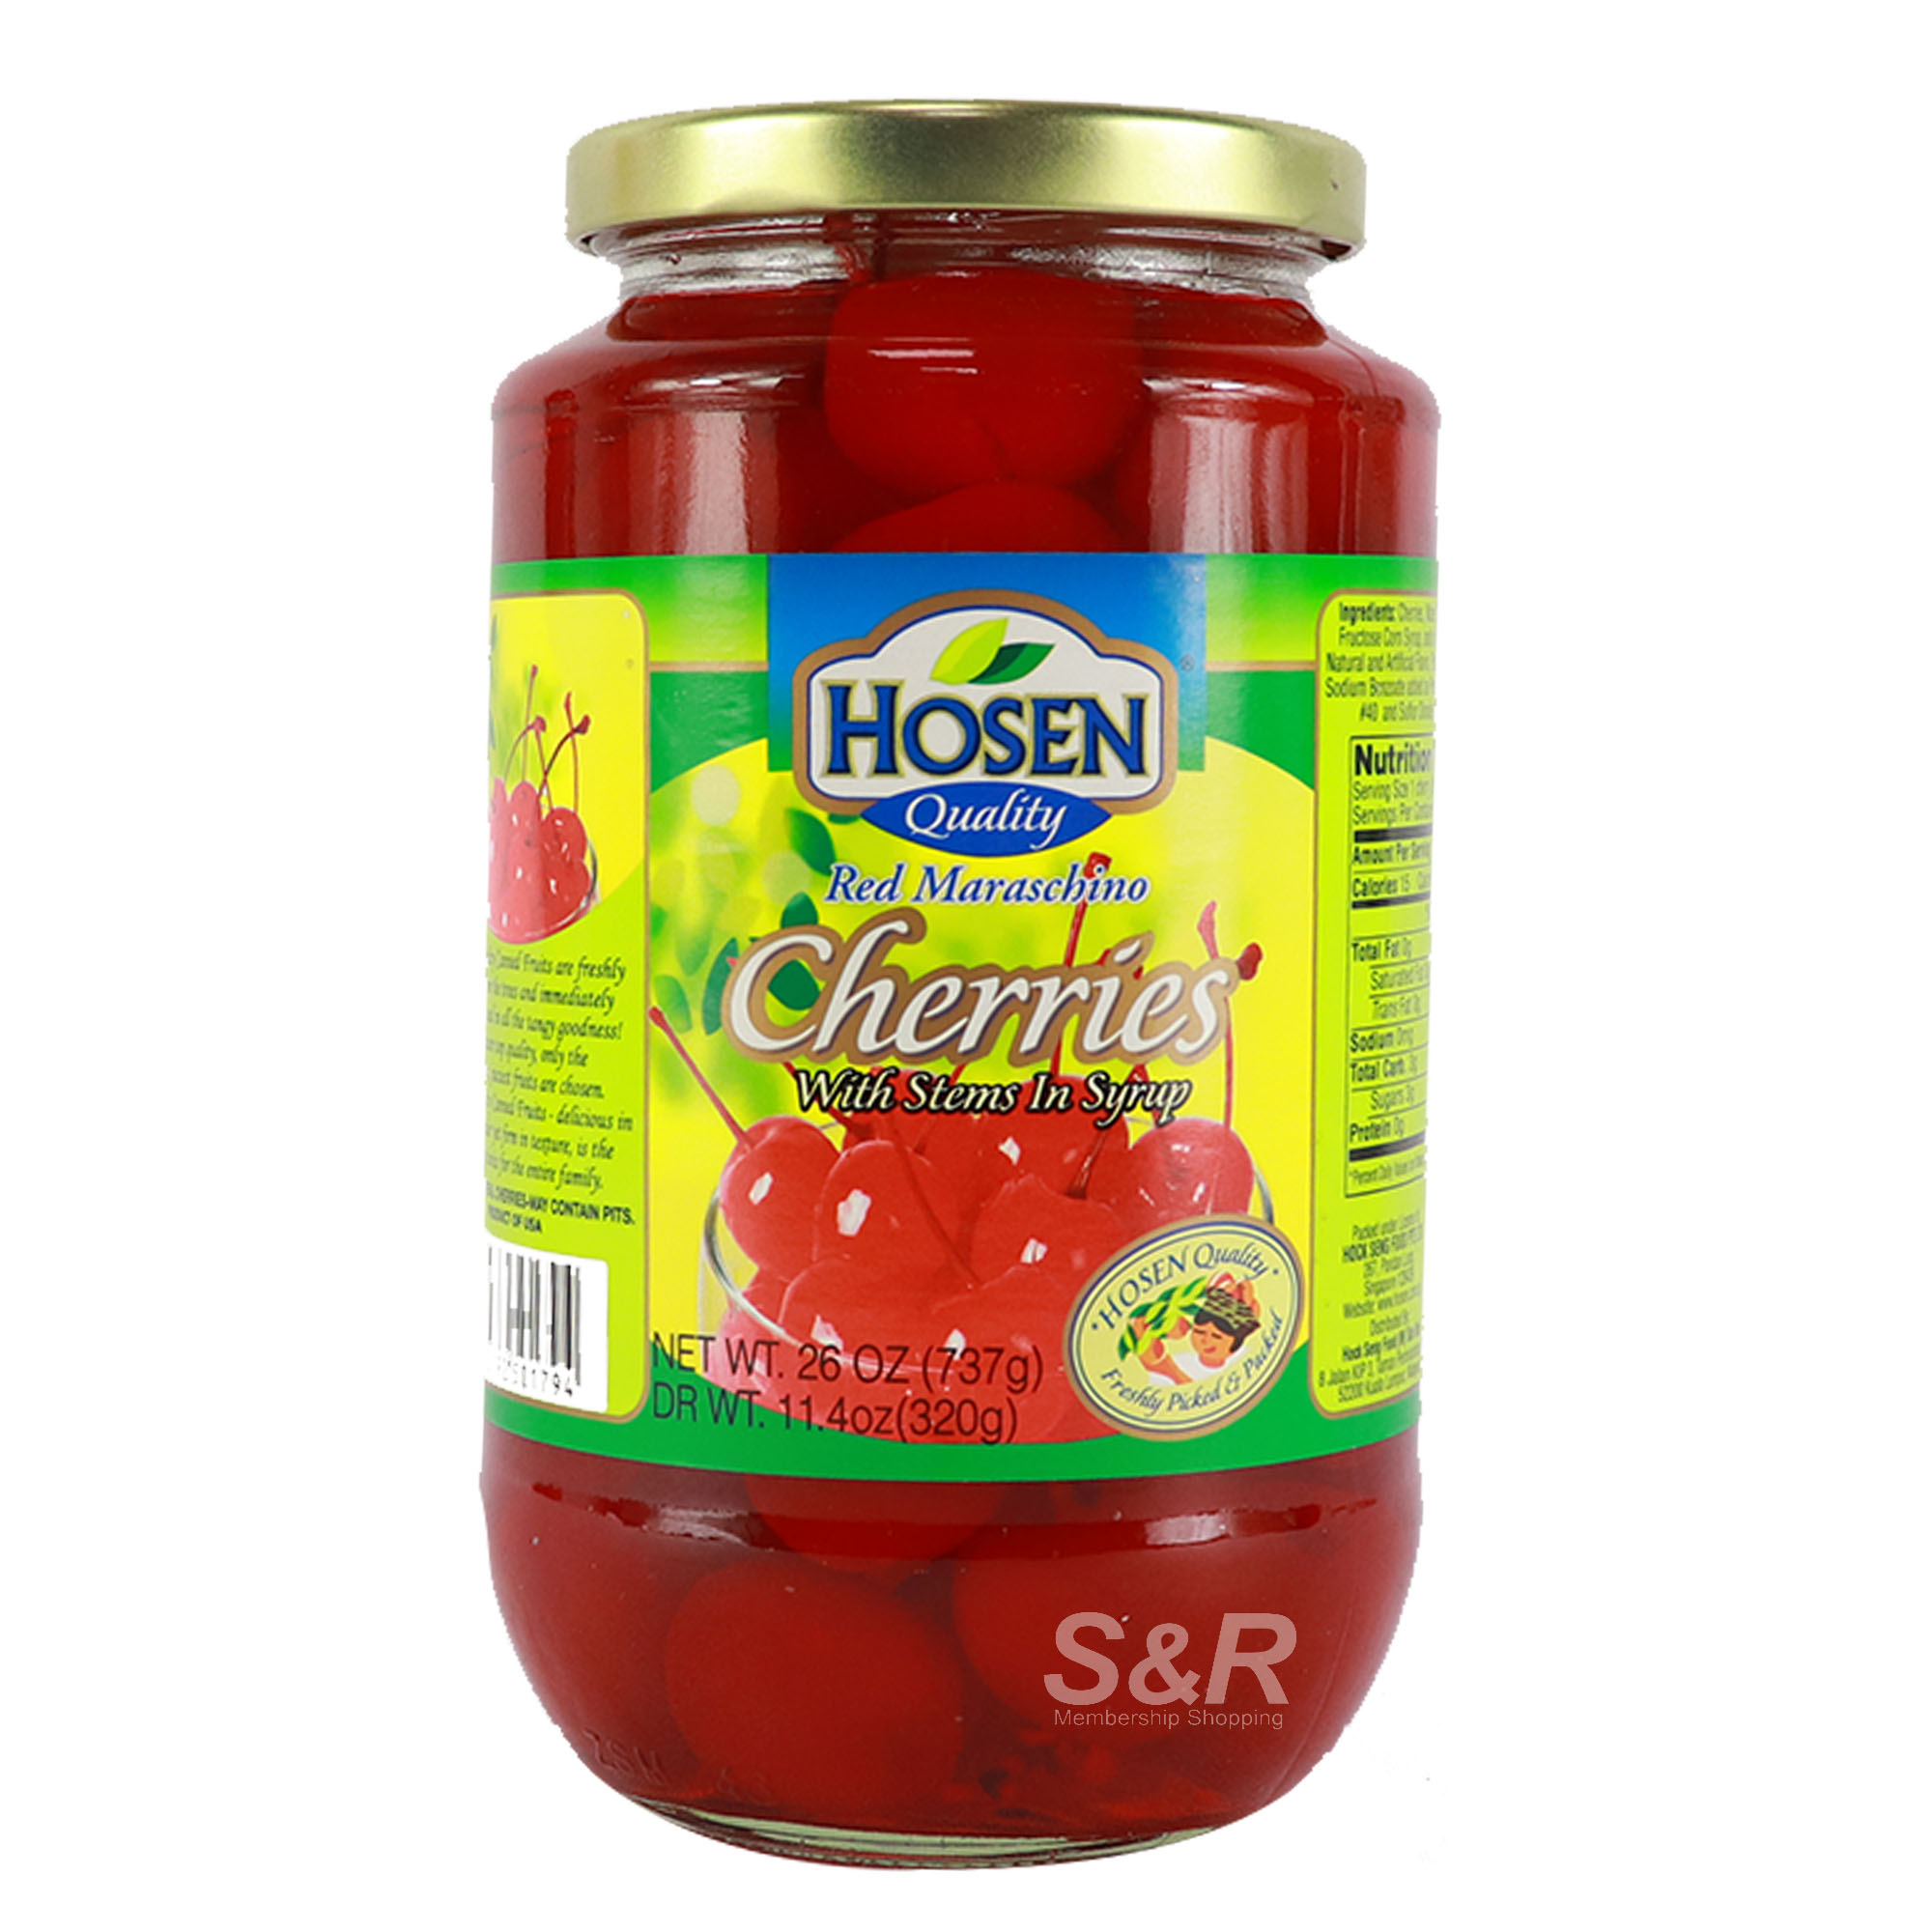 Hosen Red Maraschino Cherries with Stems in Syrup 737g